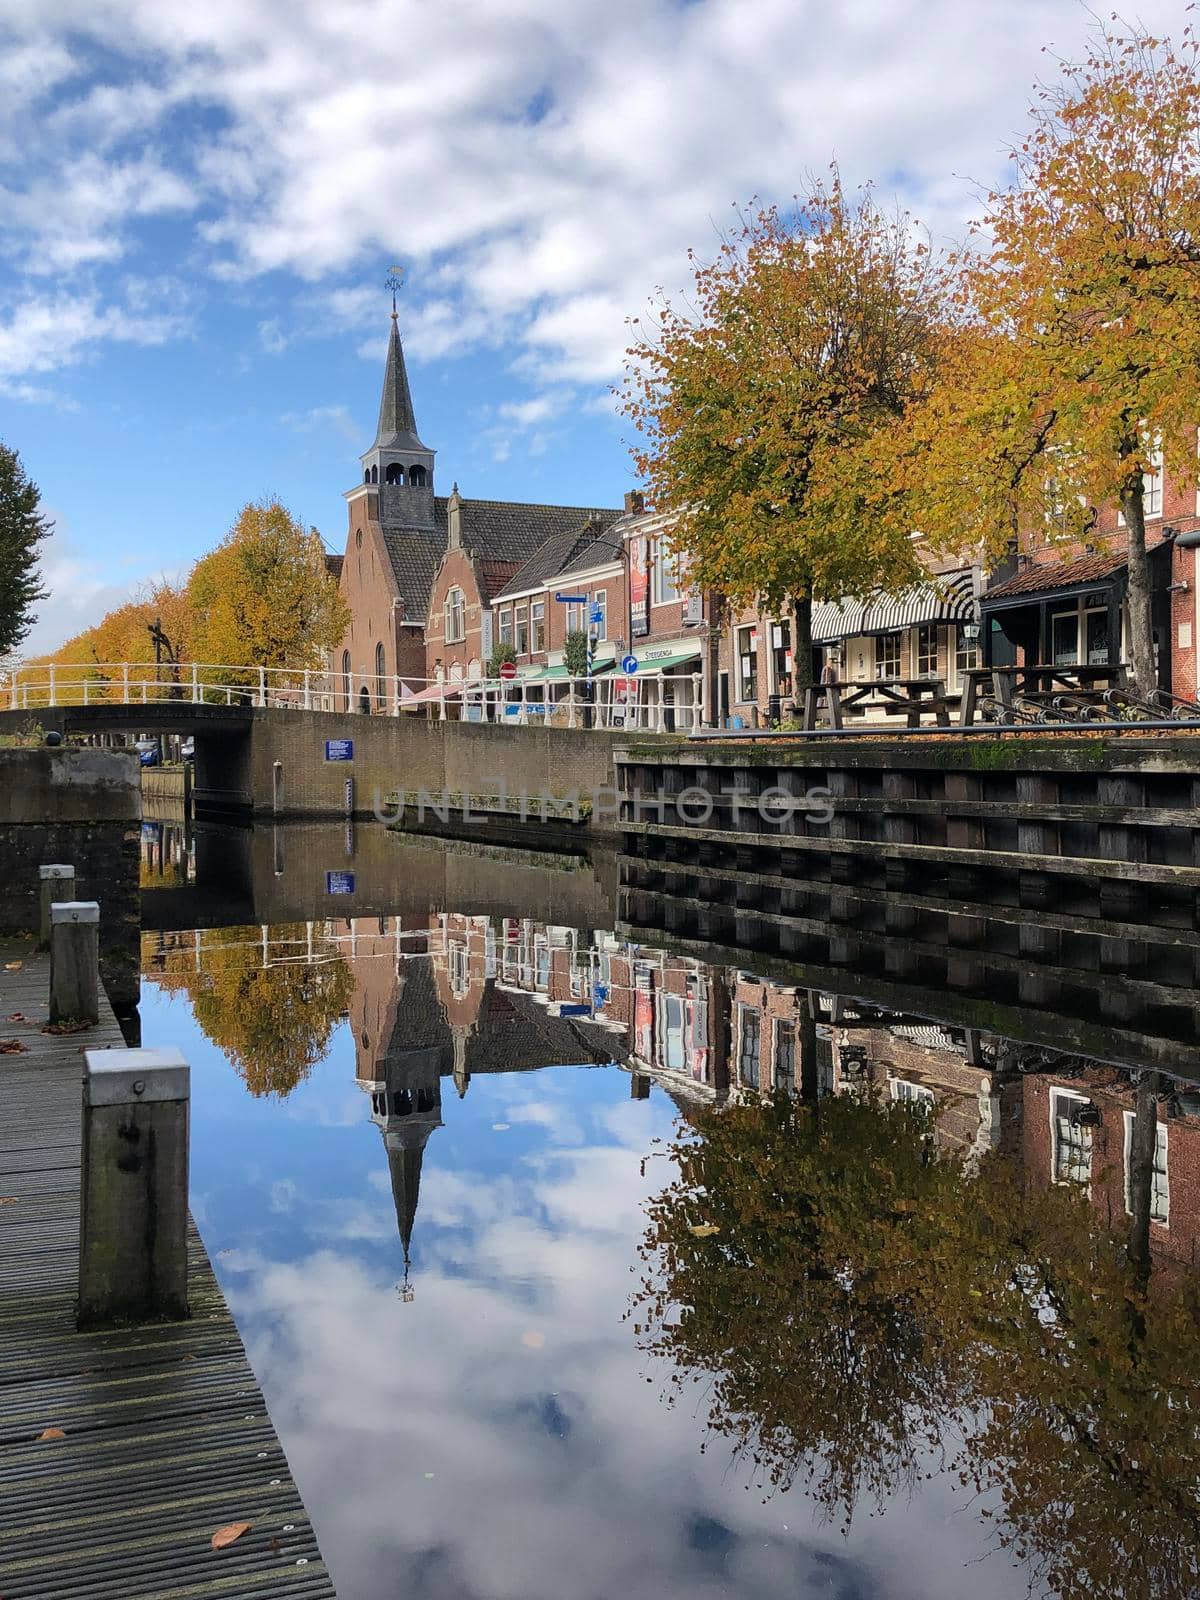 Autumn in the town Balk in Friesland, The Netherlands